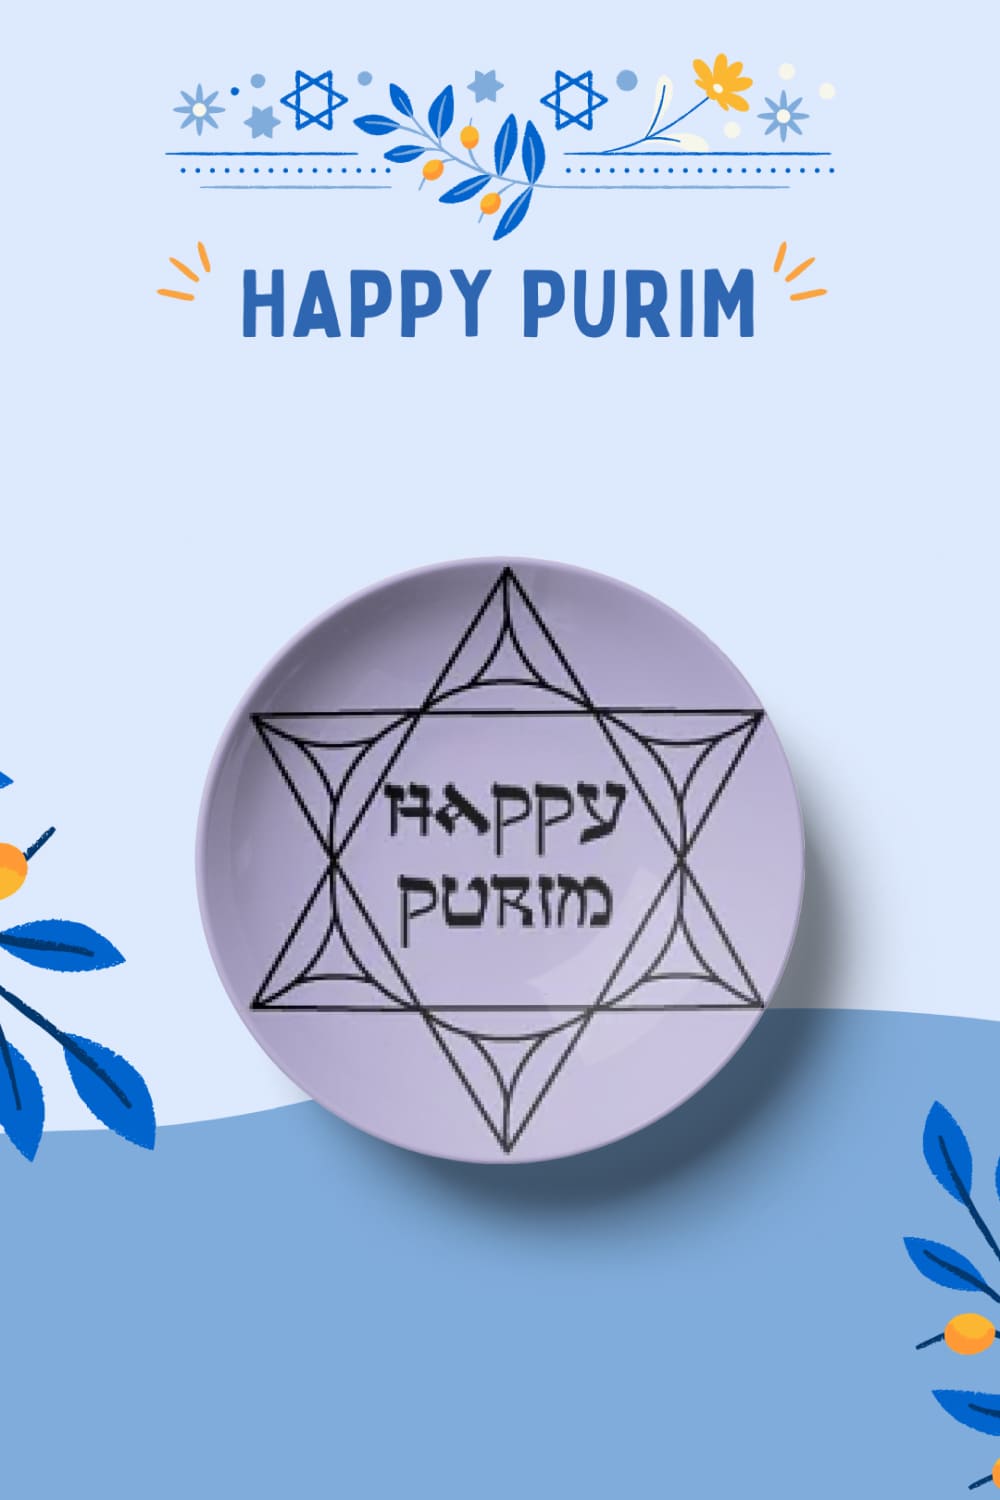 A six-pointed star is drawn on the plate and "Happy Purim" is written.